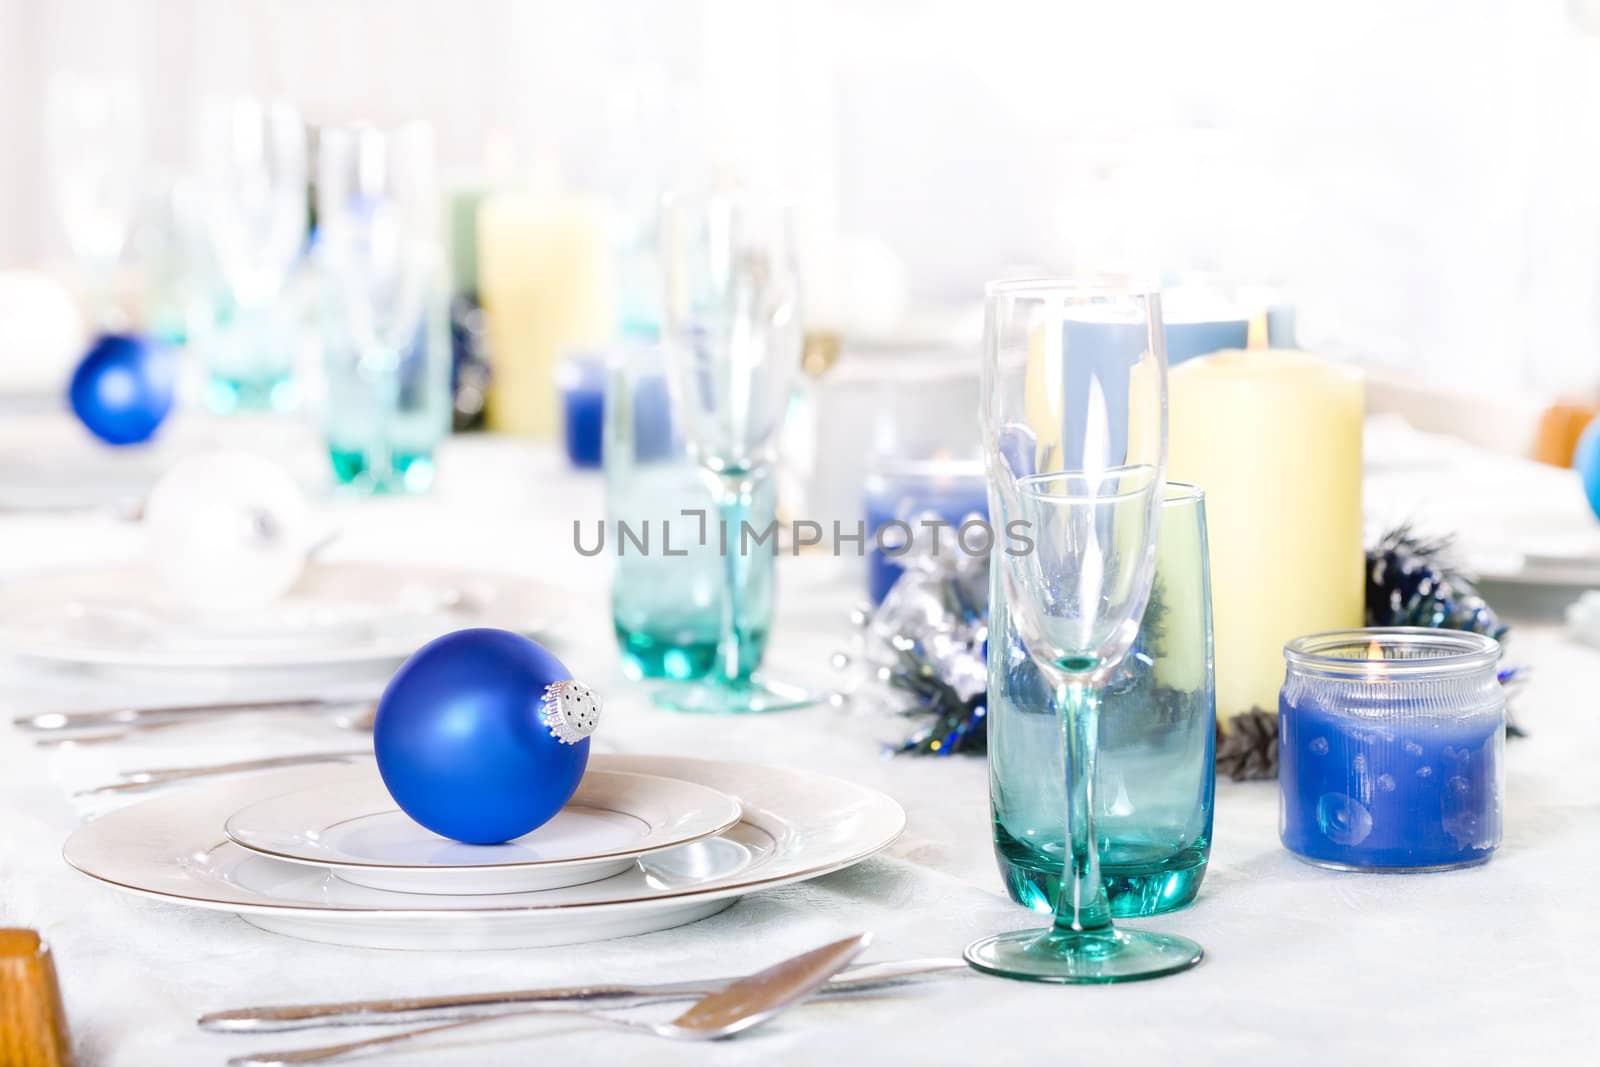 Christmas table set in blues and whites